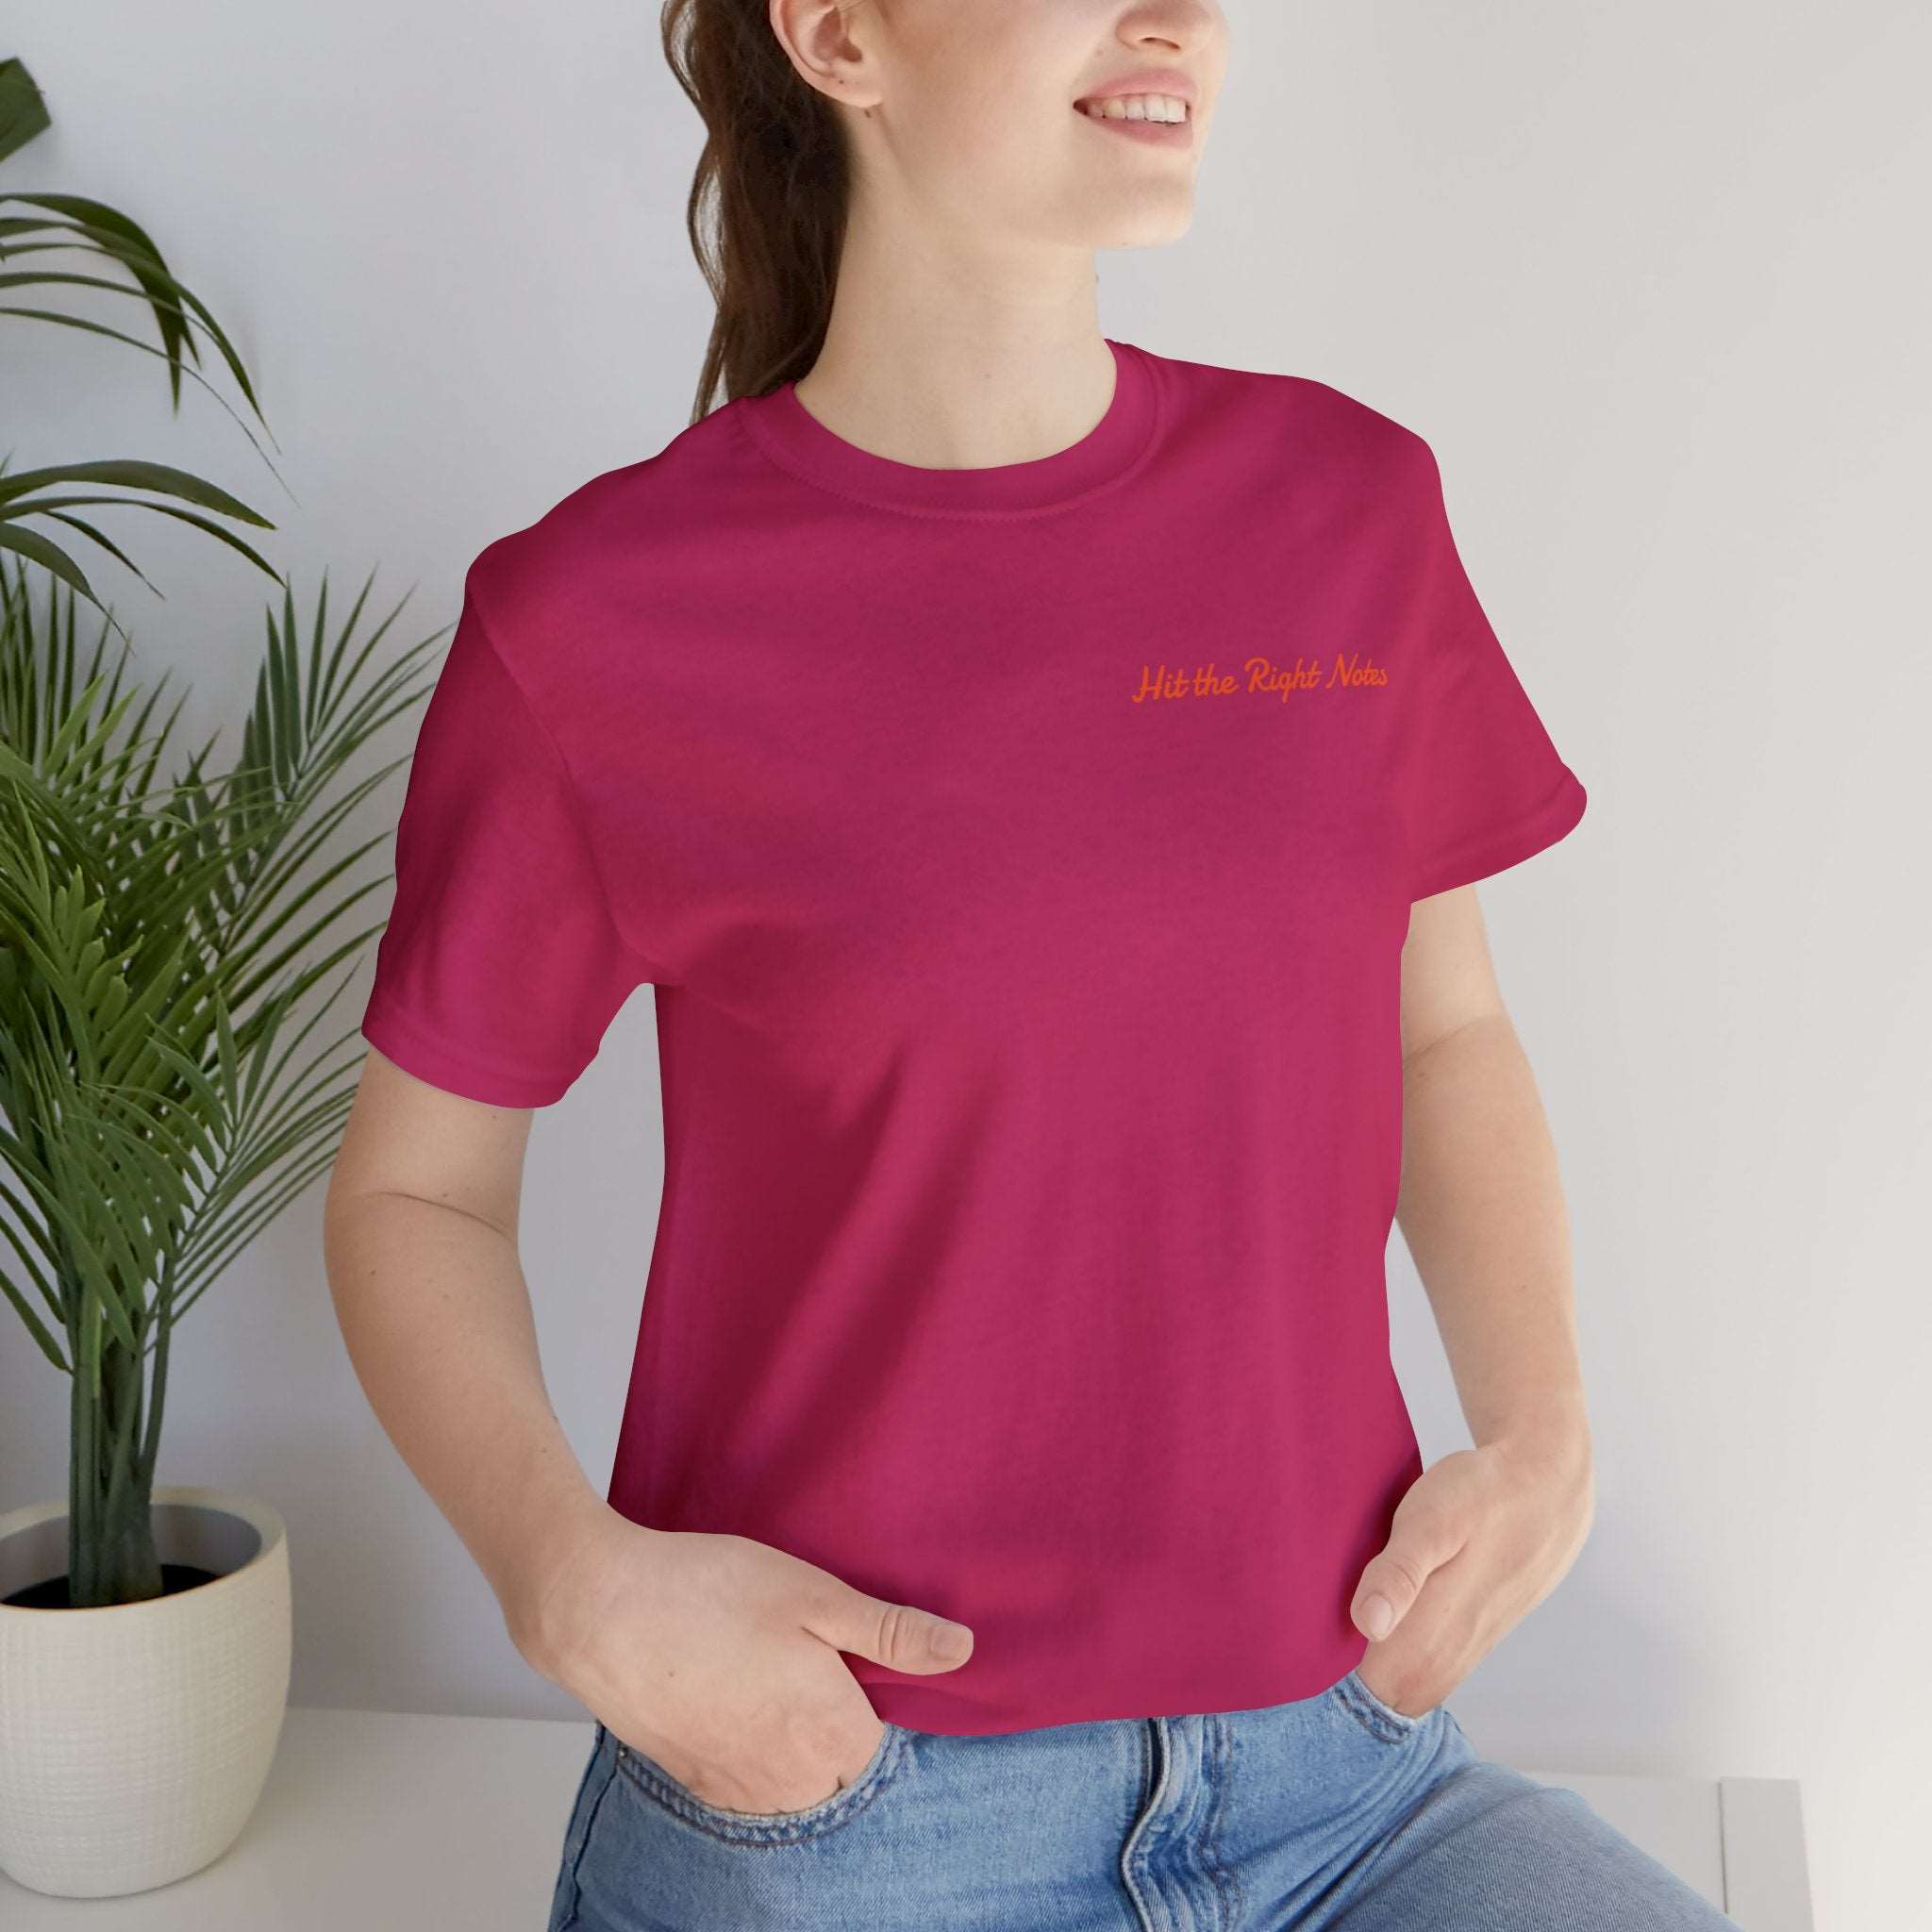 Hit the Right Notes Jersey Tee - Bella+Canvas 3001 Heather Mauve Classic Tee Comfortable Tee Cotton T-Shirt Graphic Tee JerseyTee Statement Shirt T-shirt Tee Unisex Apparel T-Shirt 11083656443287077492_2048_50131ce3-74c6-44a6-9362-cae2ba23f011 Printify